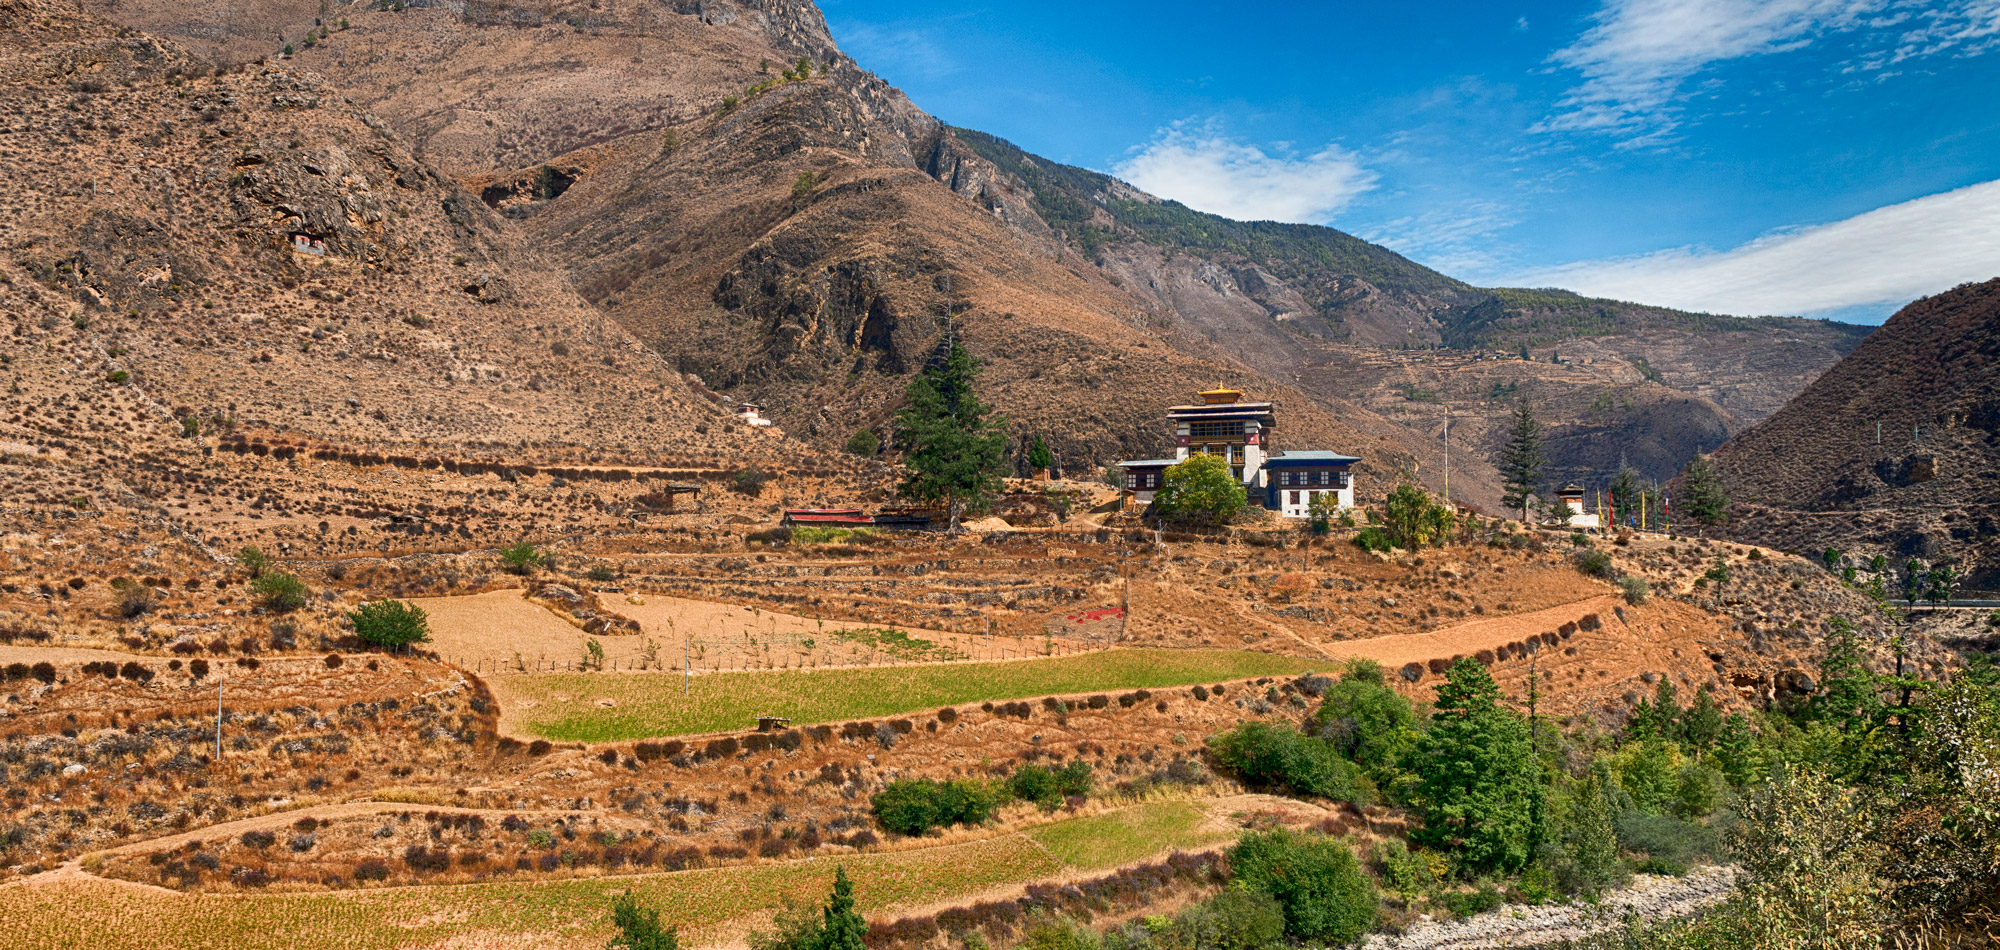 Helping Bhutan remain climate resilient and carbon negative